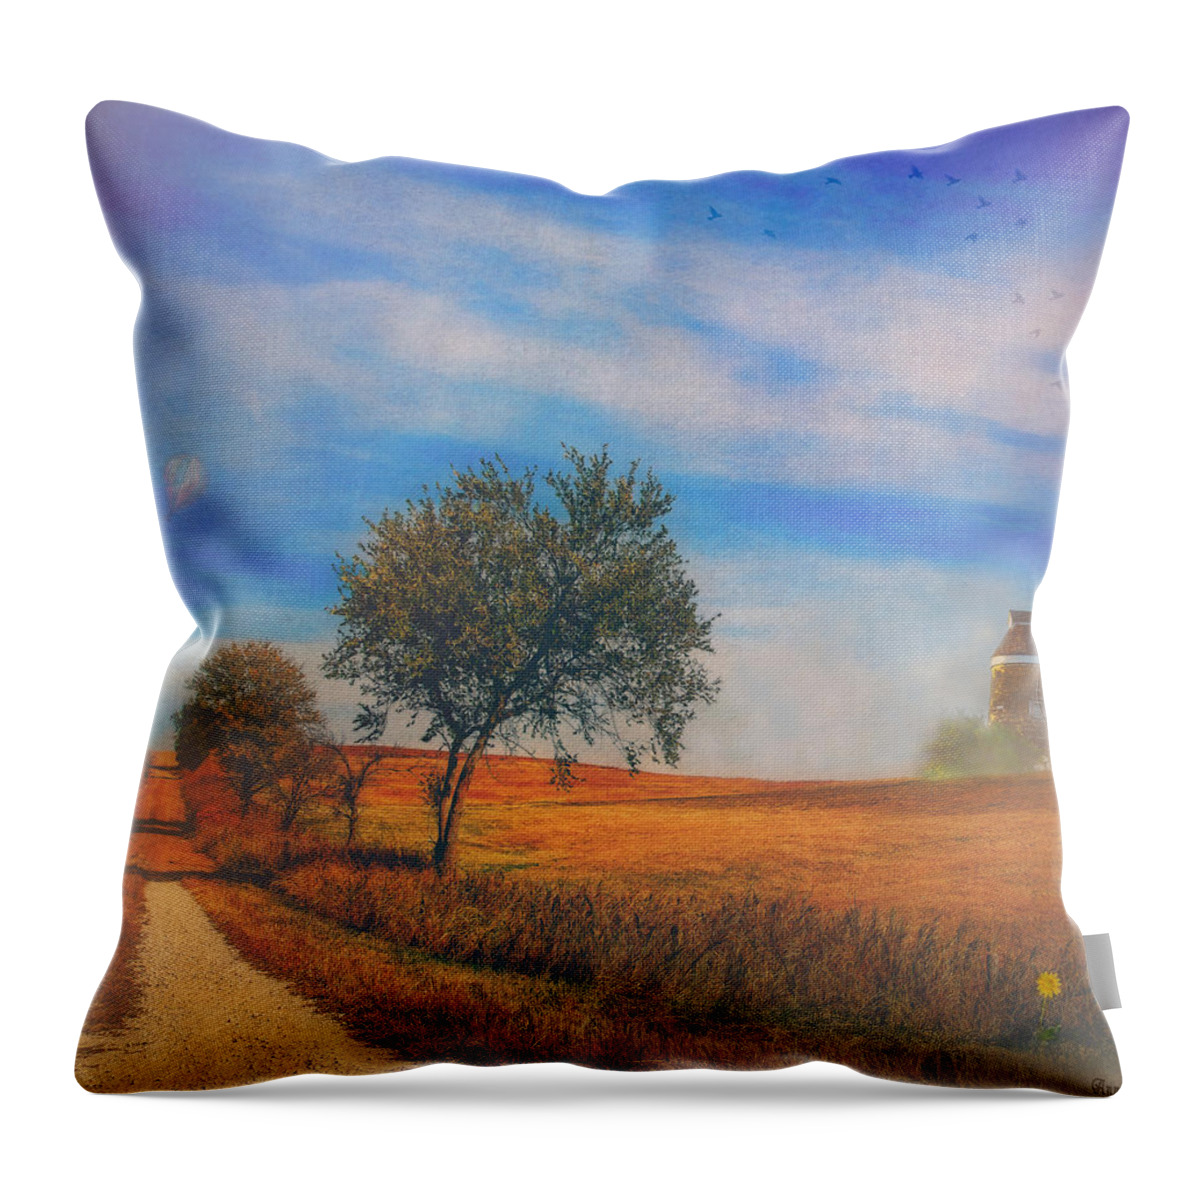 Windmill Throw Pillow featuring the photograph Windmill On The Prairie by Anna Louise